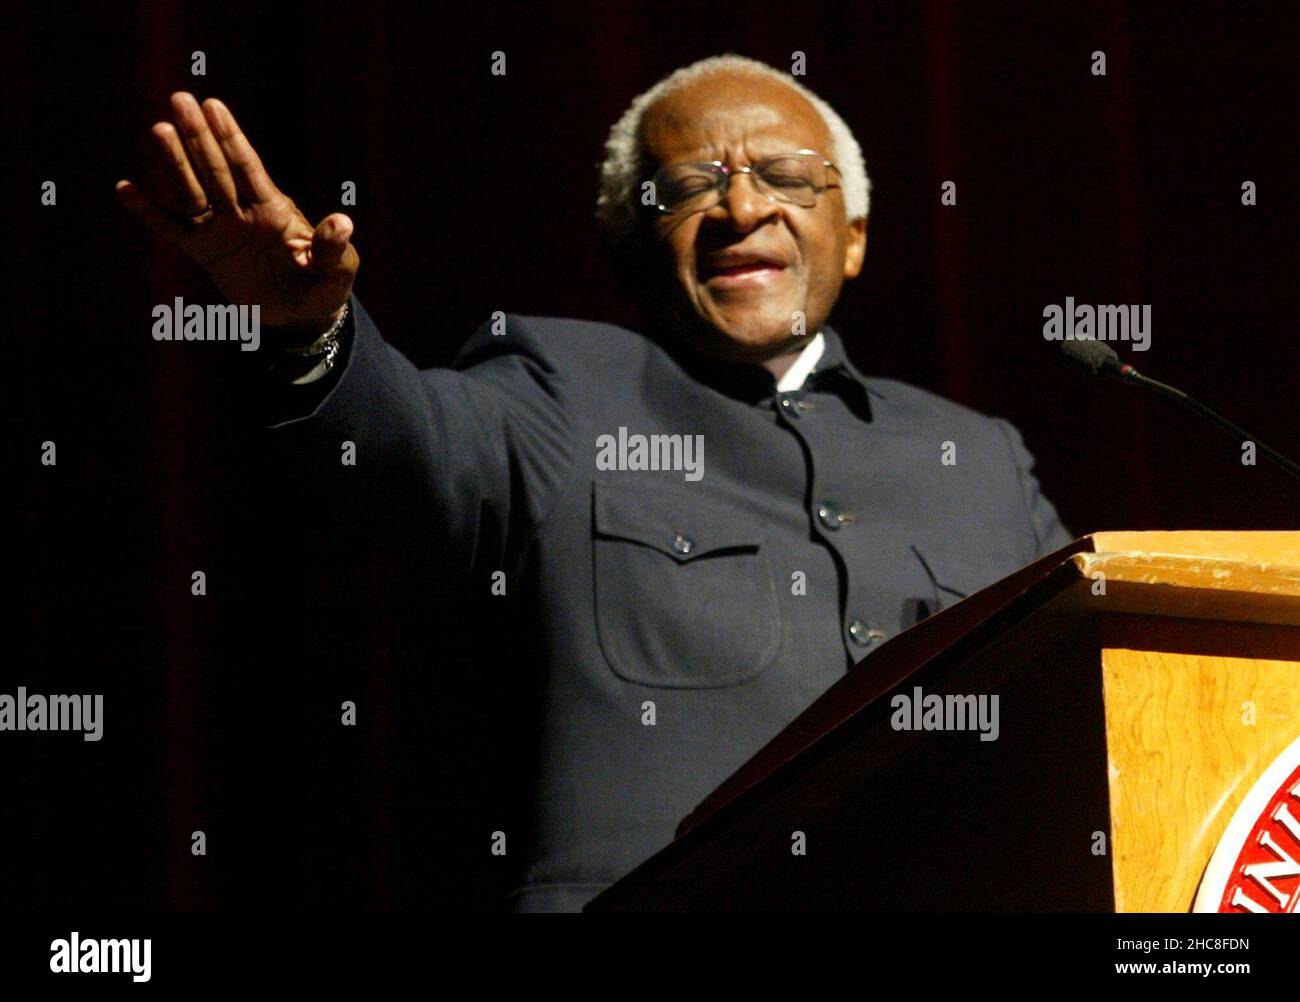 Arlington, USA. 25th Mar, 2004. KRT STAND ALONE US NEWS STORY SLUGGED: TUTU KRT PHOTO BY STEWART F. HOUSE/FORT WORTH STAR-TELEGRAM (DALLAS OUT) (March 26) Archbishop Desmond Tutu of South Africa speaks on Thursday, March 25, 2004, at the University of Texas at Arlington in Arlington, Texas. (Photo by gsb) 2004 Credit: Sipa USA/Alamy Live News Stock Photo